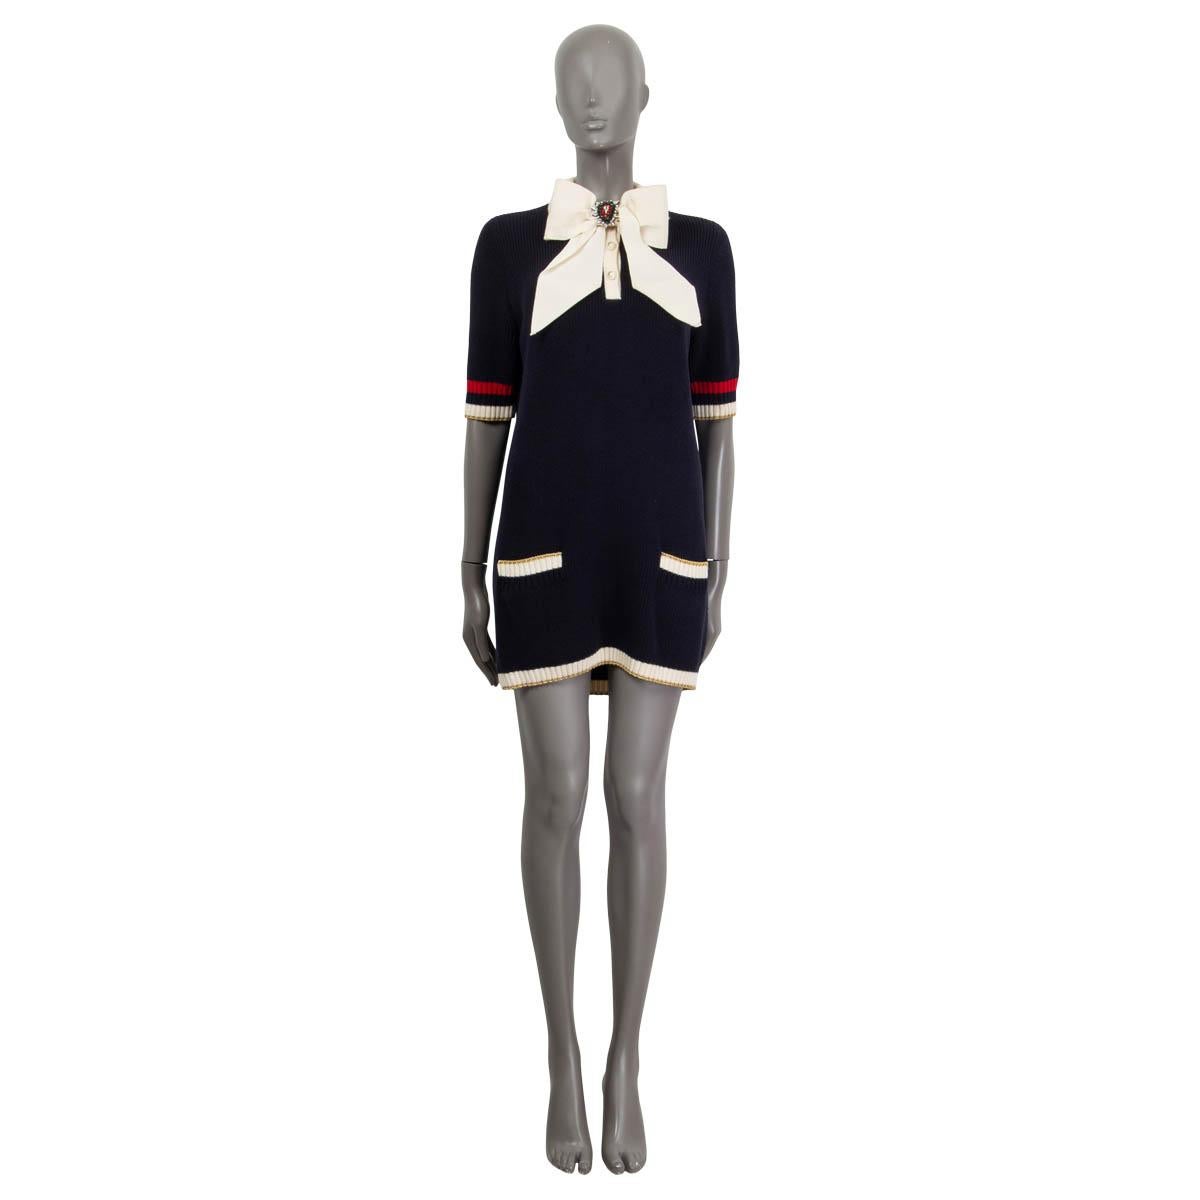 100% authentic Gucci short sleeve tunic sweater in midnight blue, red, gold and off-white cotton (97%) and nylon (2%). Can also be worn as a dress. Features a detachable crystal embellished bow and two patch pockets on the front. Opens with three